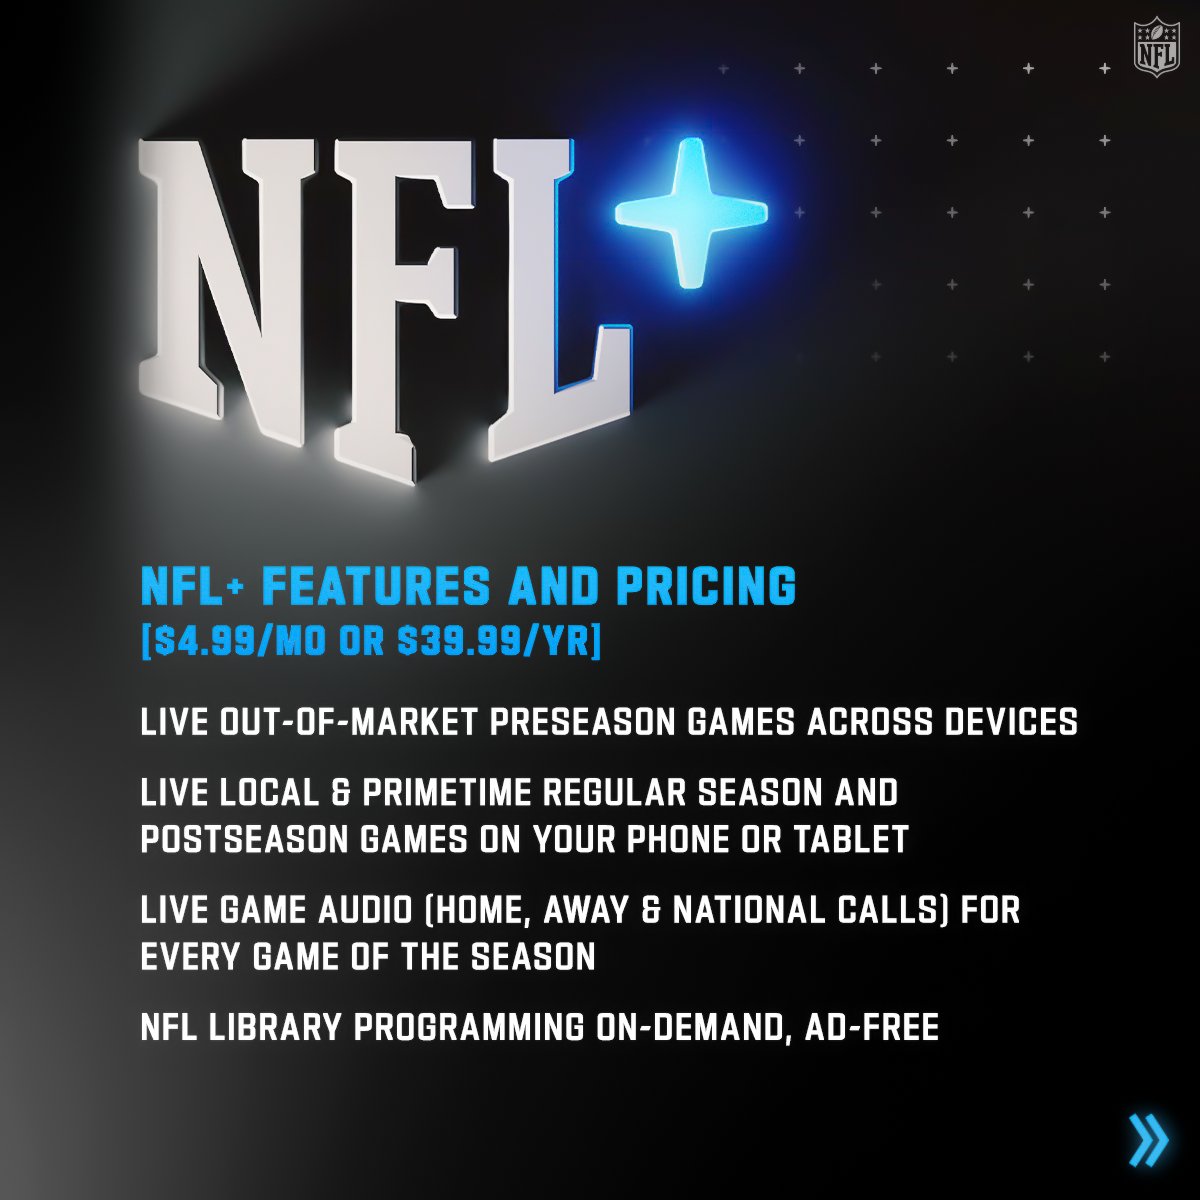 NFL Review PCMag escapeauthority